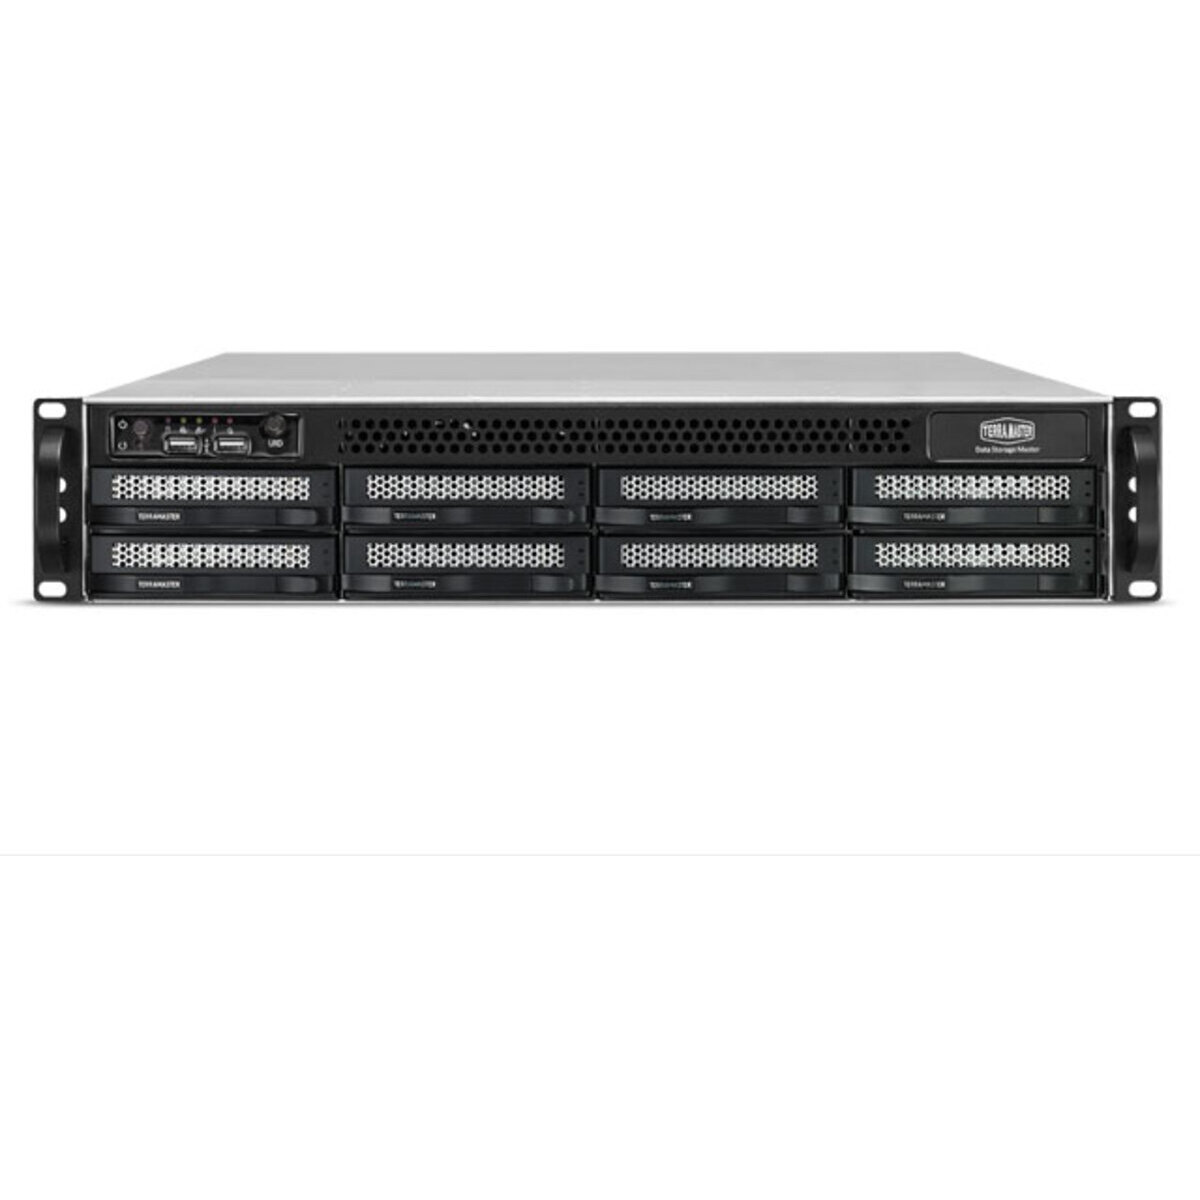 TerraMaster U8-722-2224 24tb 8-Bay RackMount Large Business / Enterprise NAS - Network Attached Storage Device 6x4tb Seagate IronWolf ST4000VN006 3.5 5400rpm SATA 6Gb/s HDD NAS Class Drives Installed - Burn-In Tested U8-722-2224